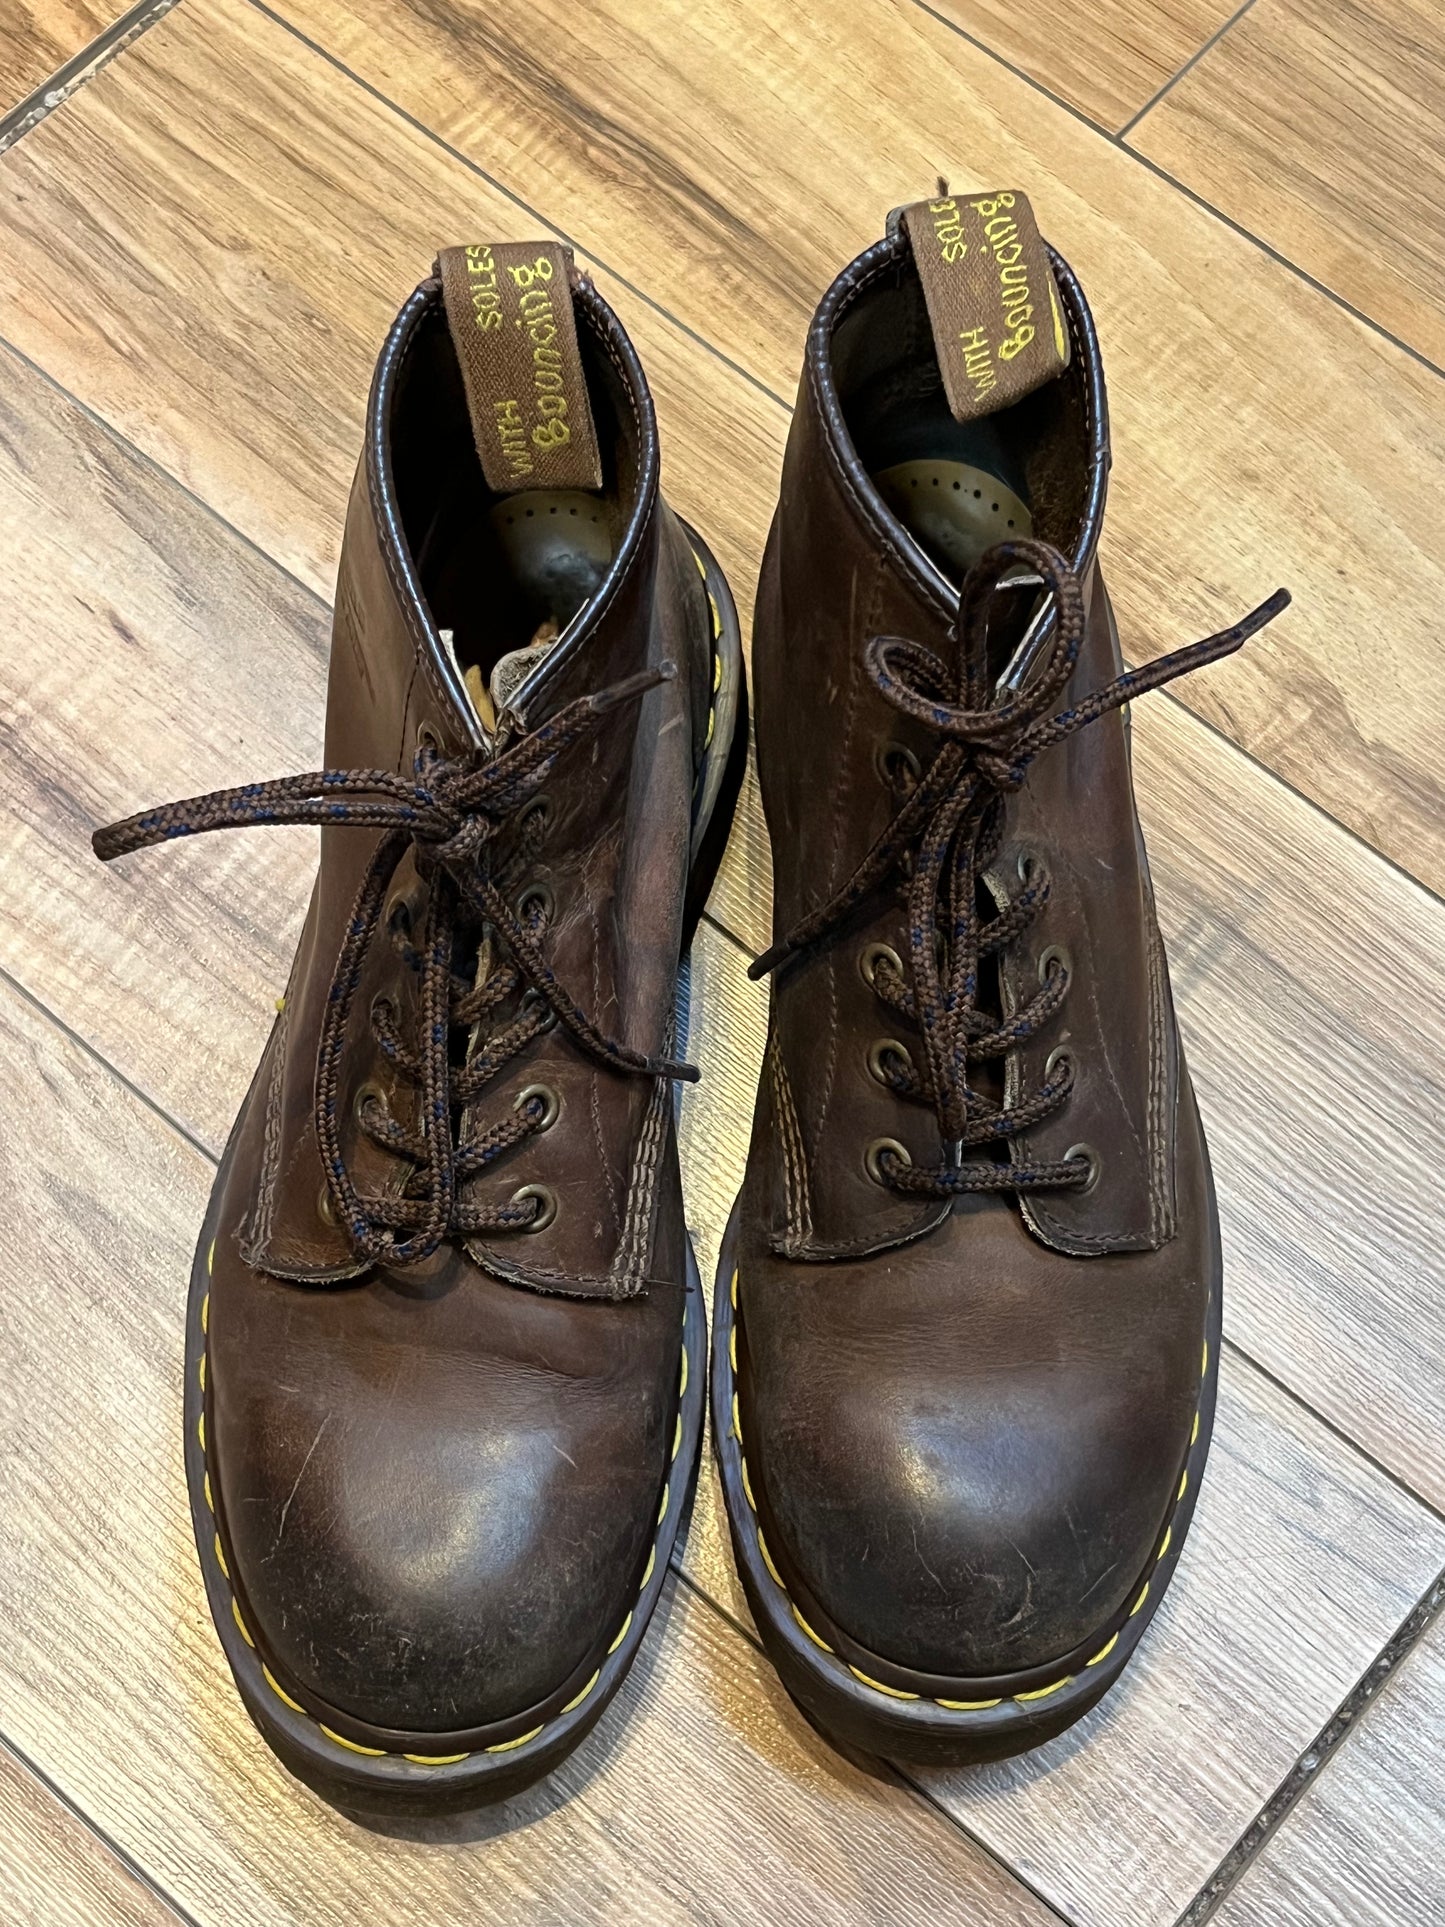 Vintage Doc Martens Brown 6 Eyelet Leather Boots, Made in England, Size UK 7, US Men’s 8, Women’s 9